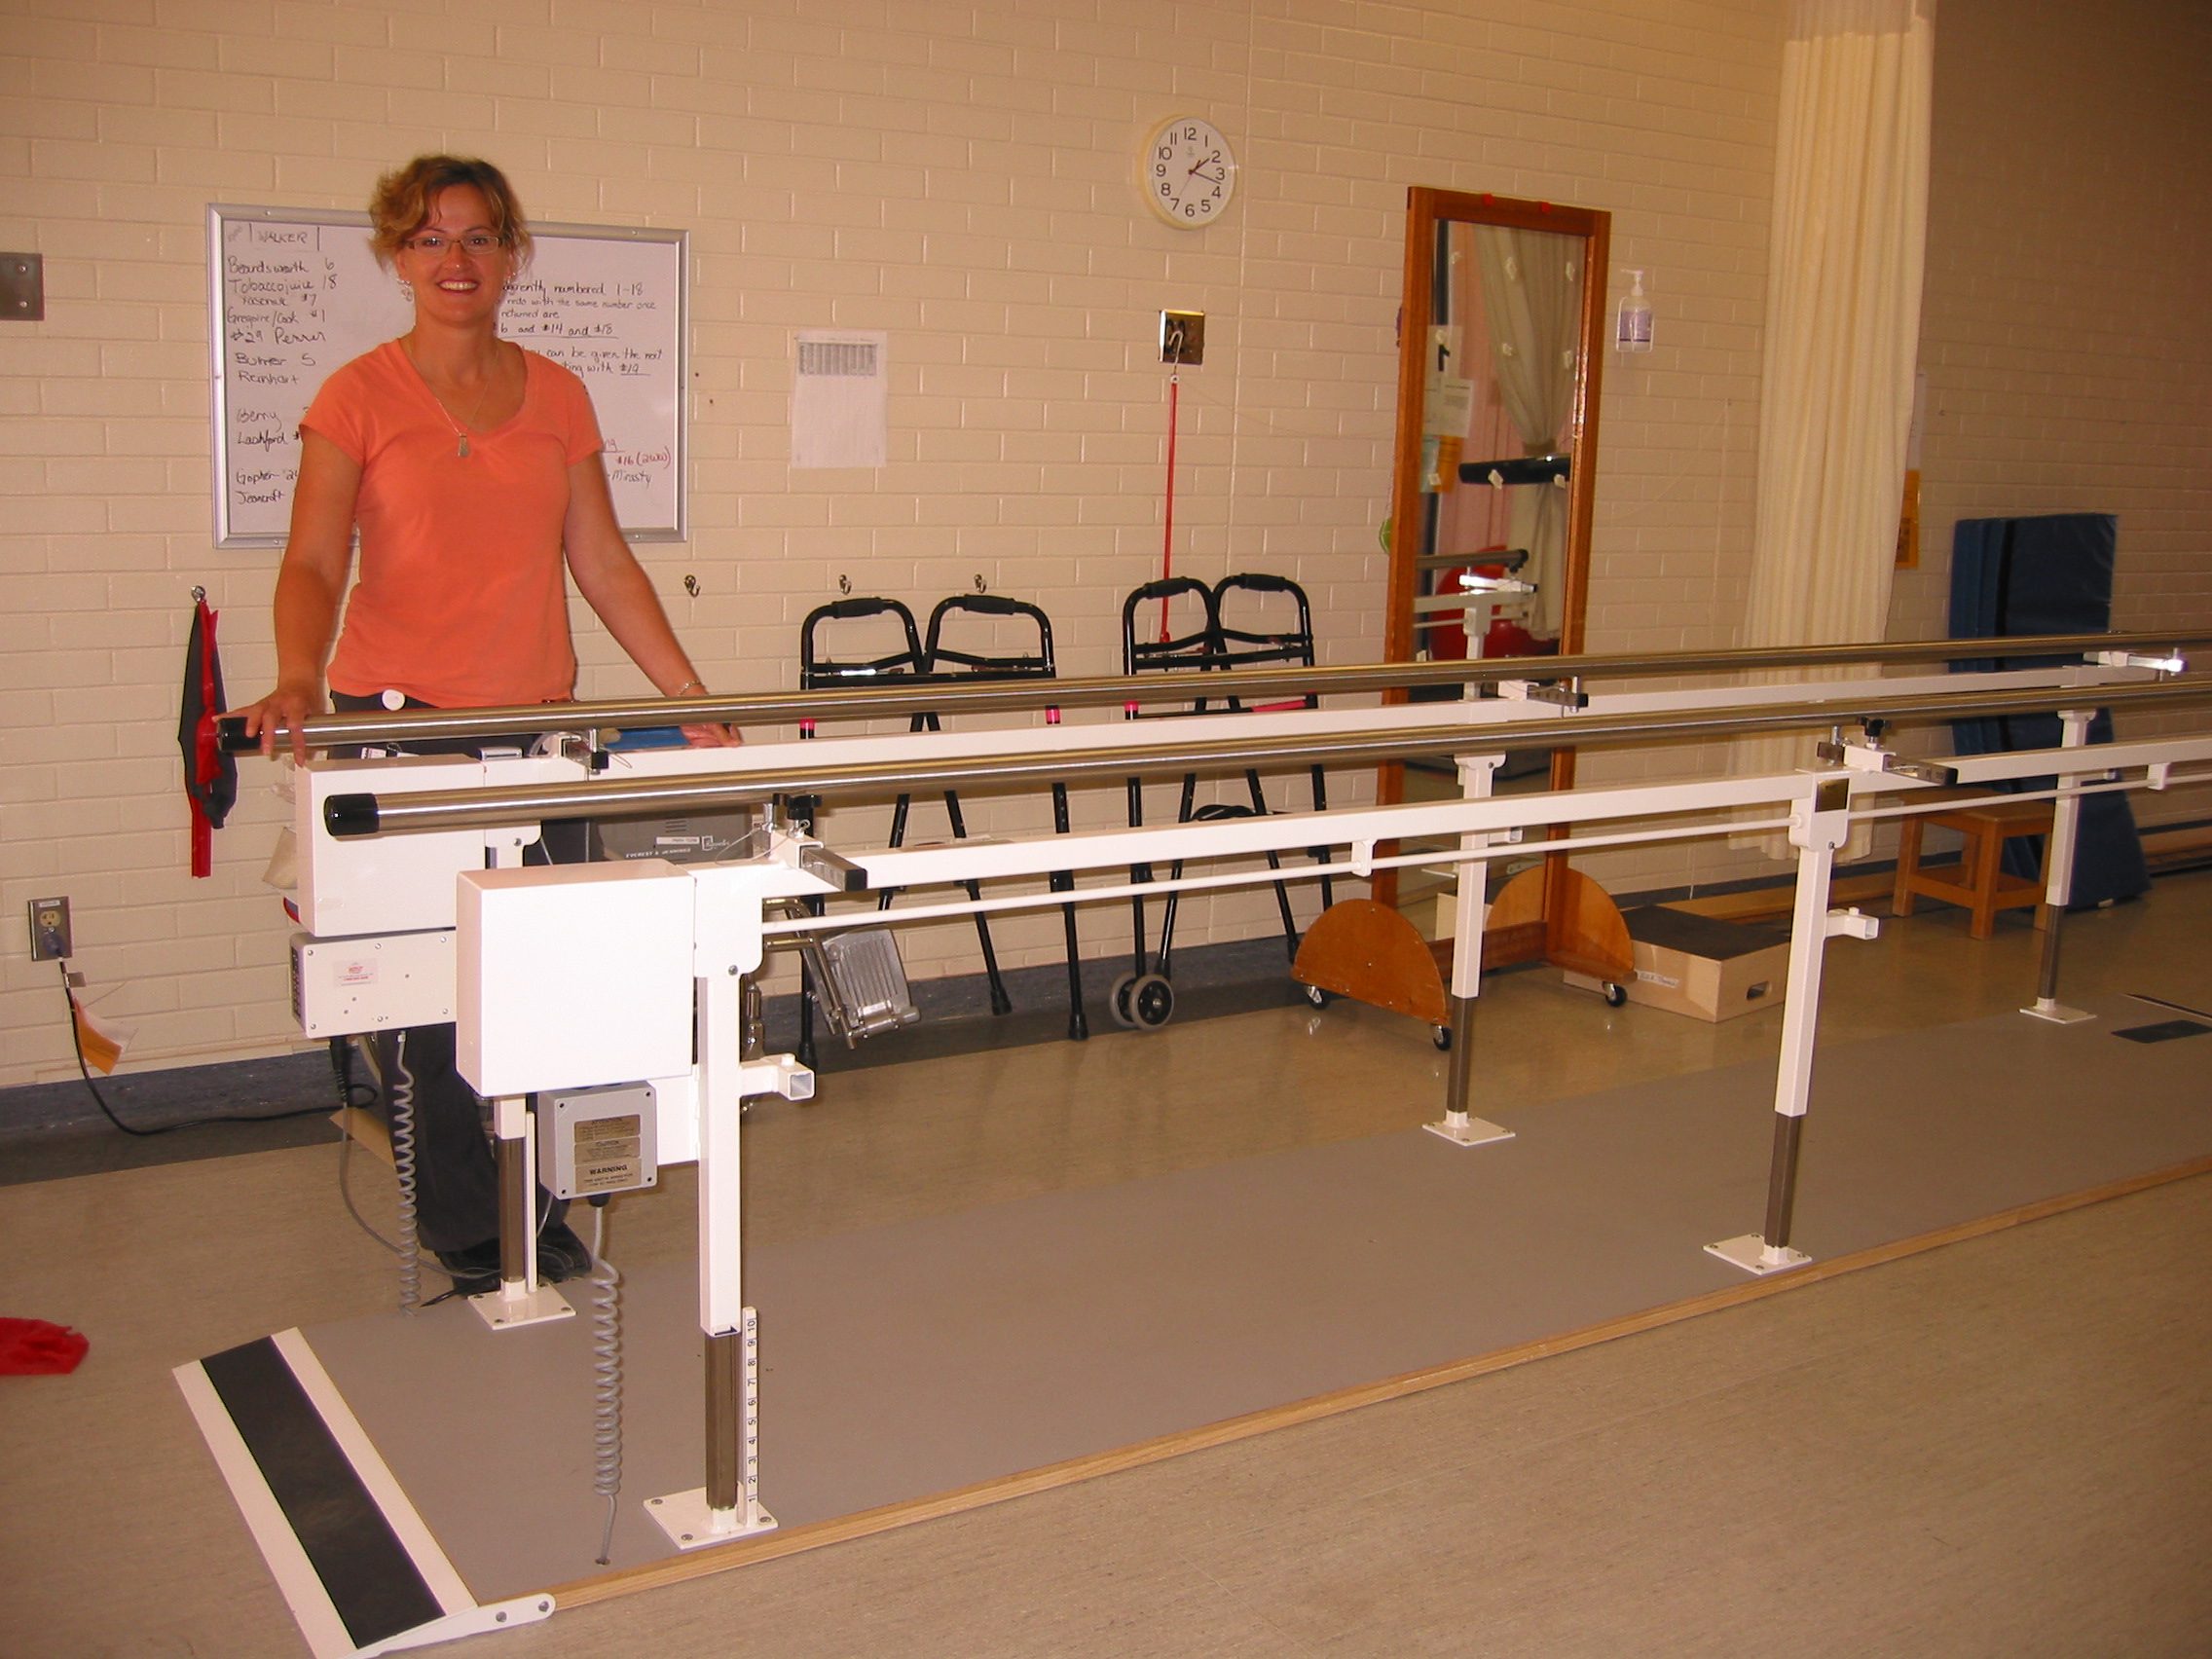 Parallel Bars for Physiotherapy